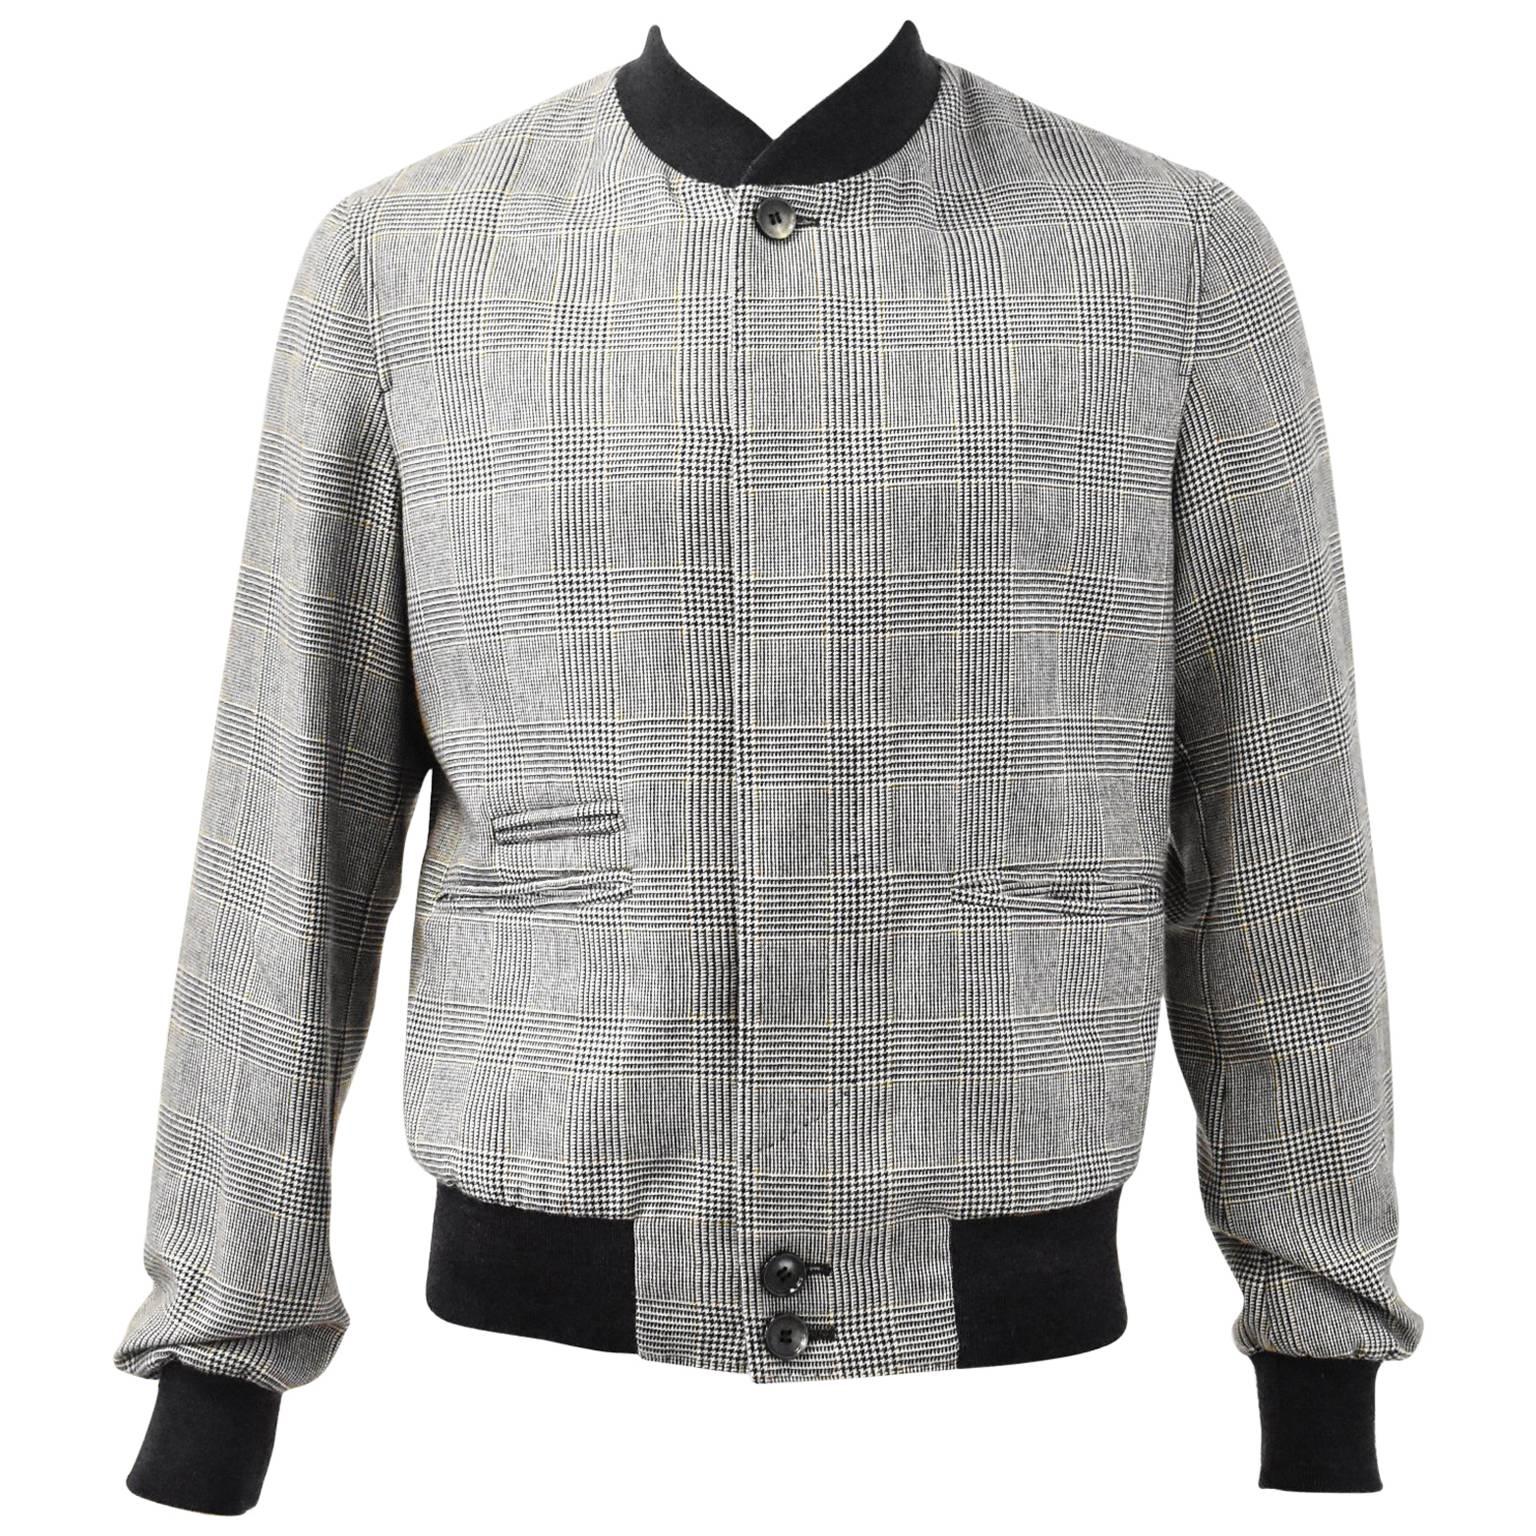 Alexander McQueen Grey Prince of Wales Check Cashmere Bomber Jacket A/W 14 For Sale